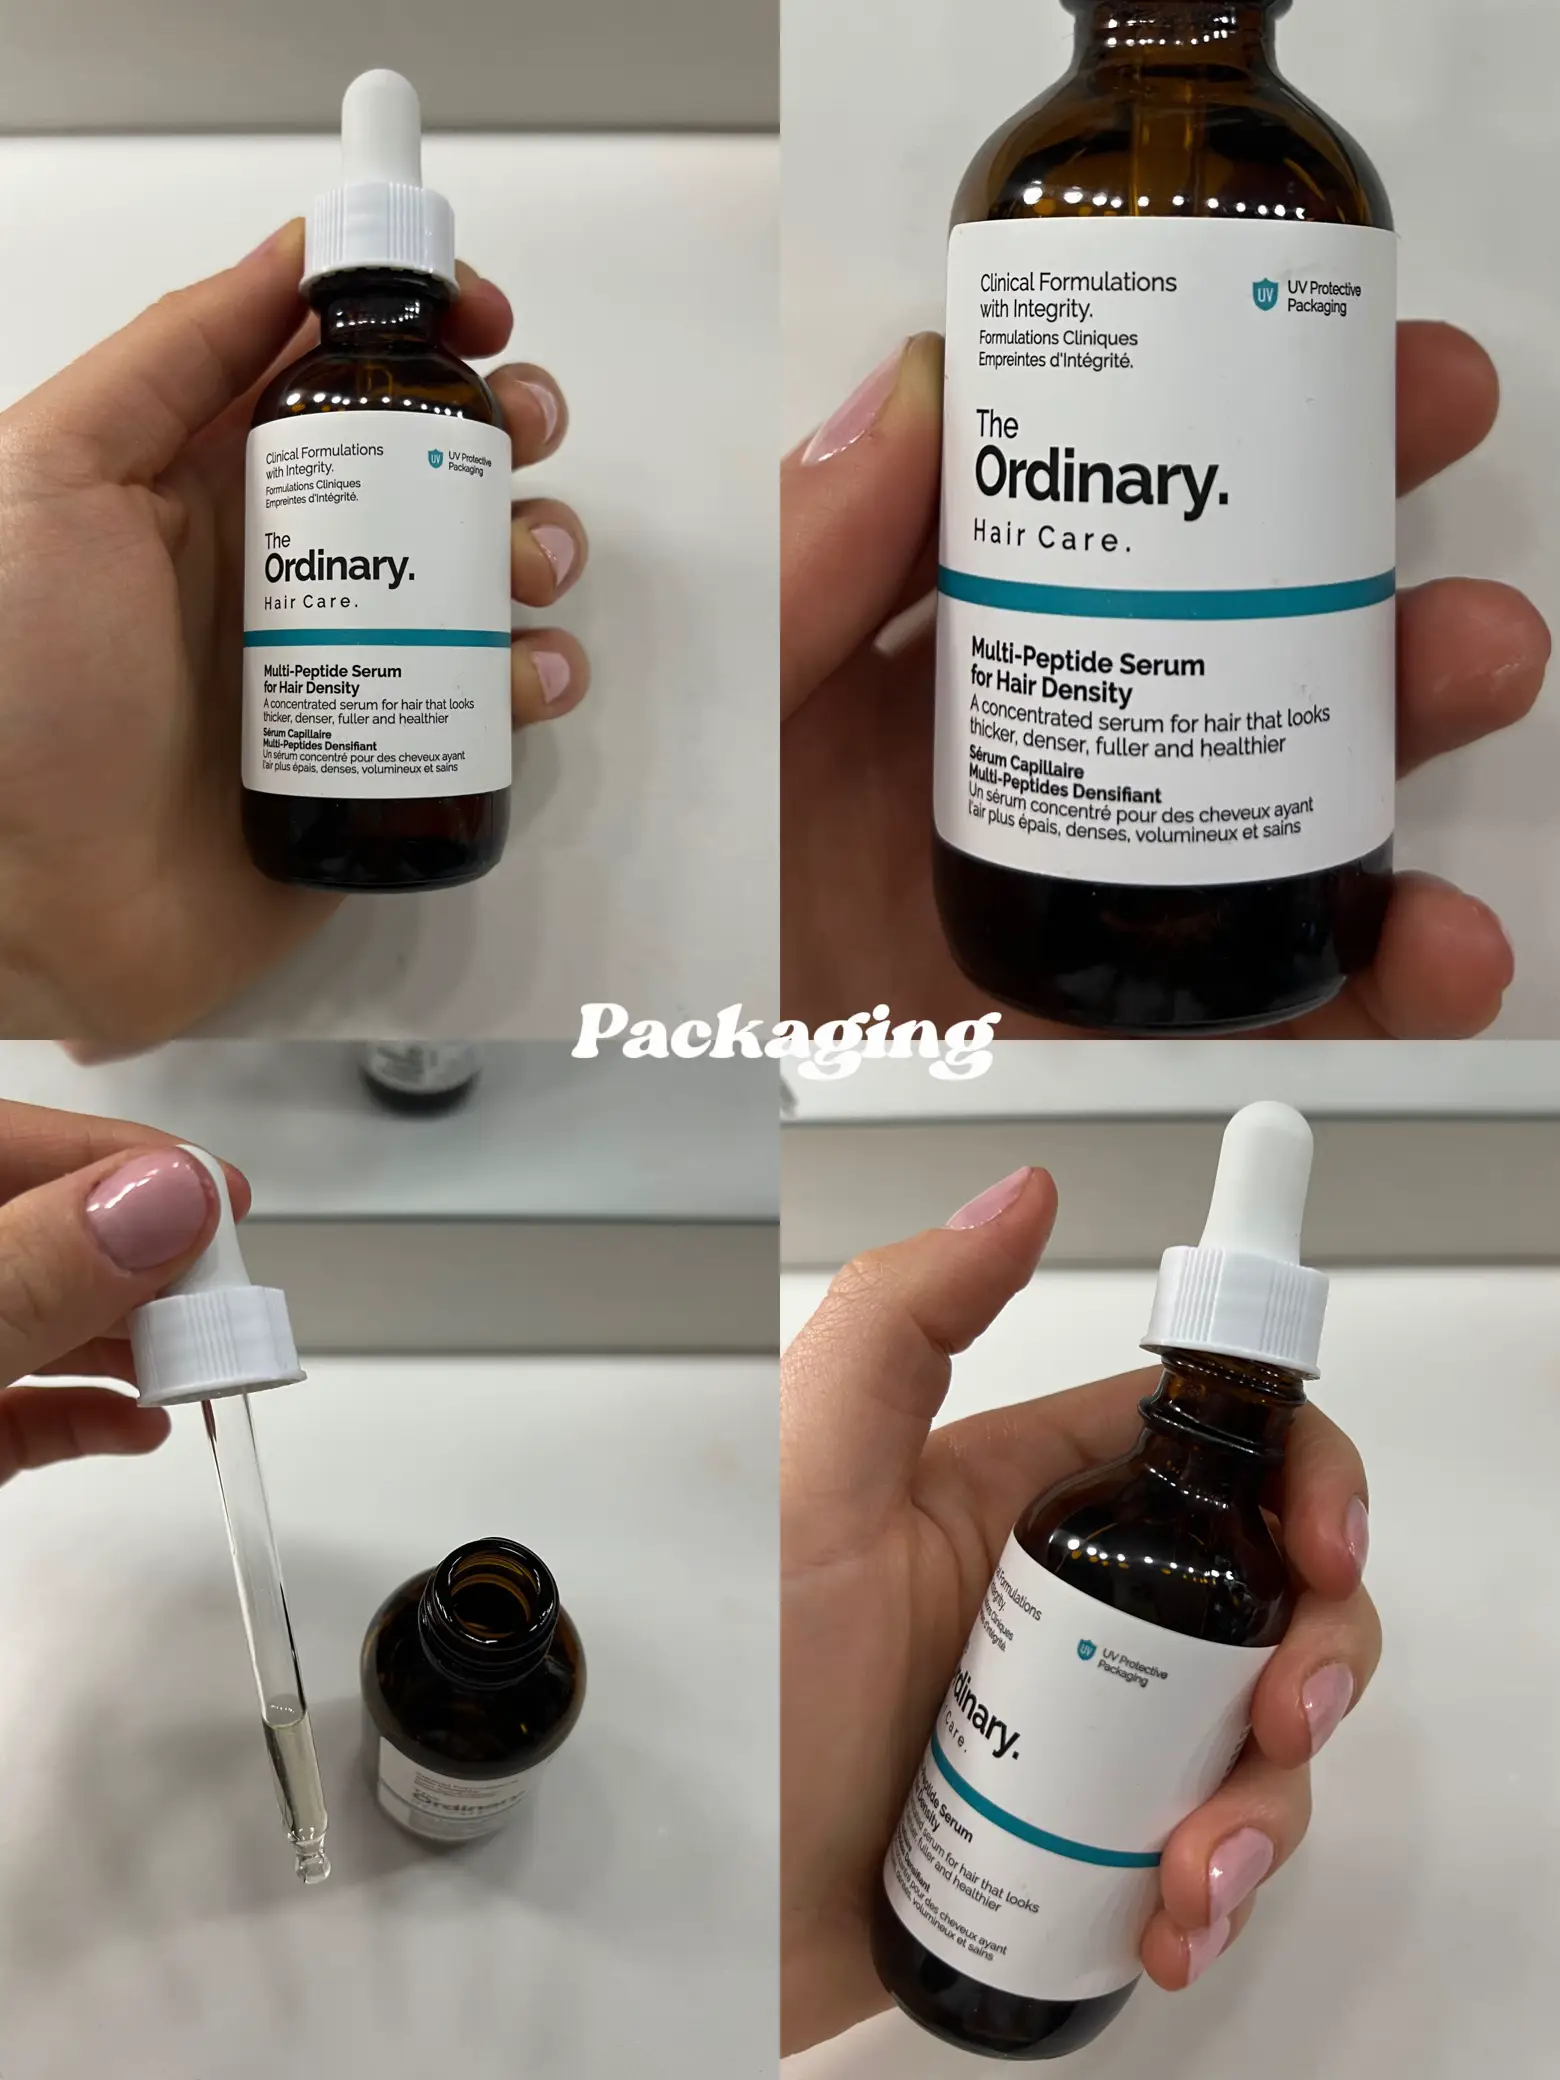 I tried The Ordinary's new haircare range to see if it lives up to the hype